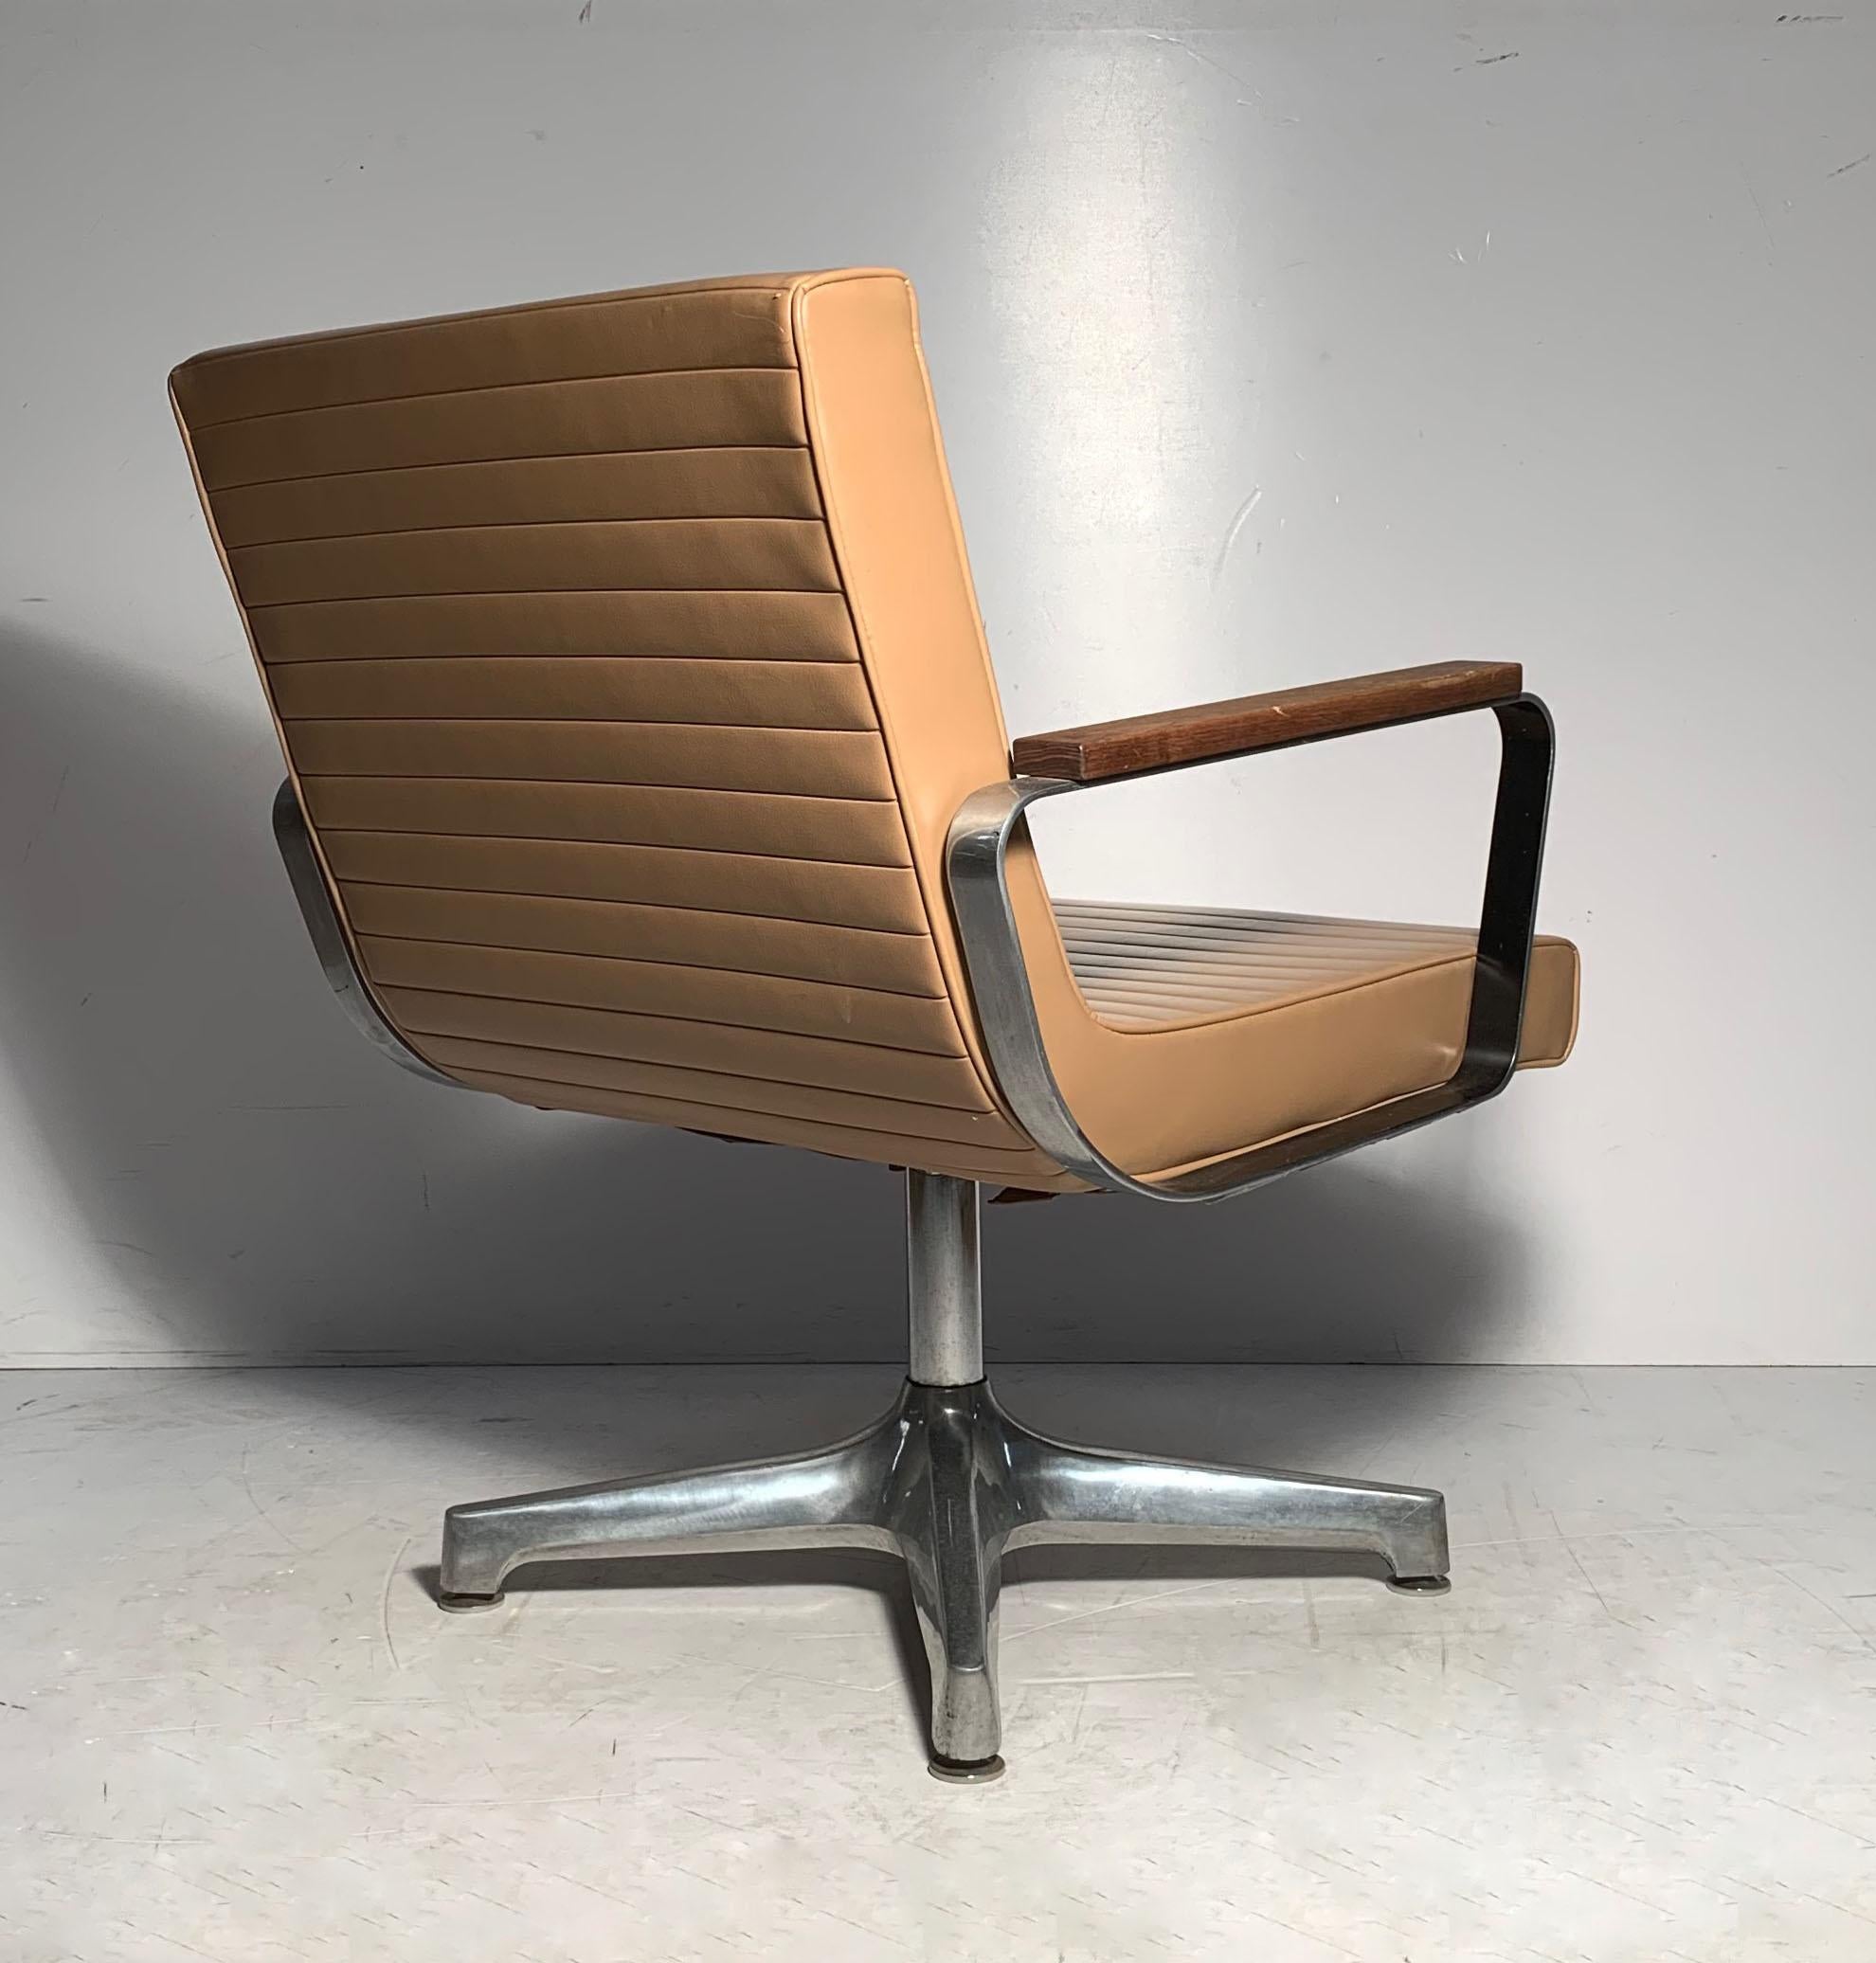 American Vintage 1970s Techfab Chromcraft Latte Lounge Chairs For Sale